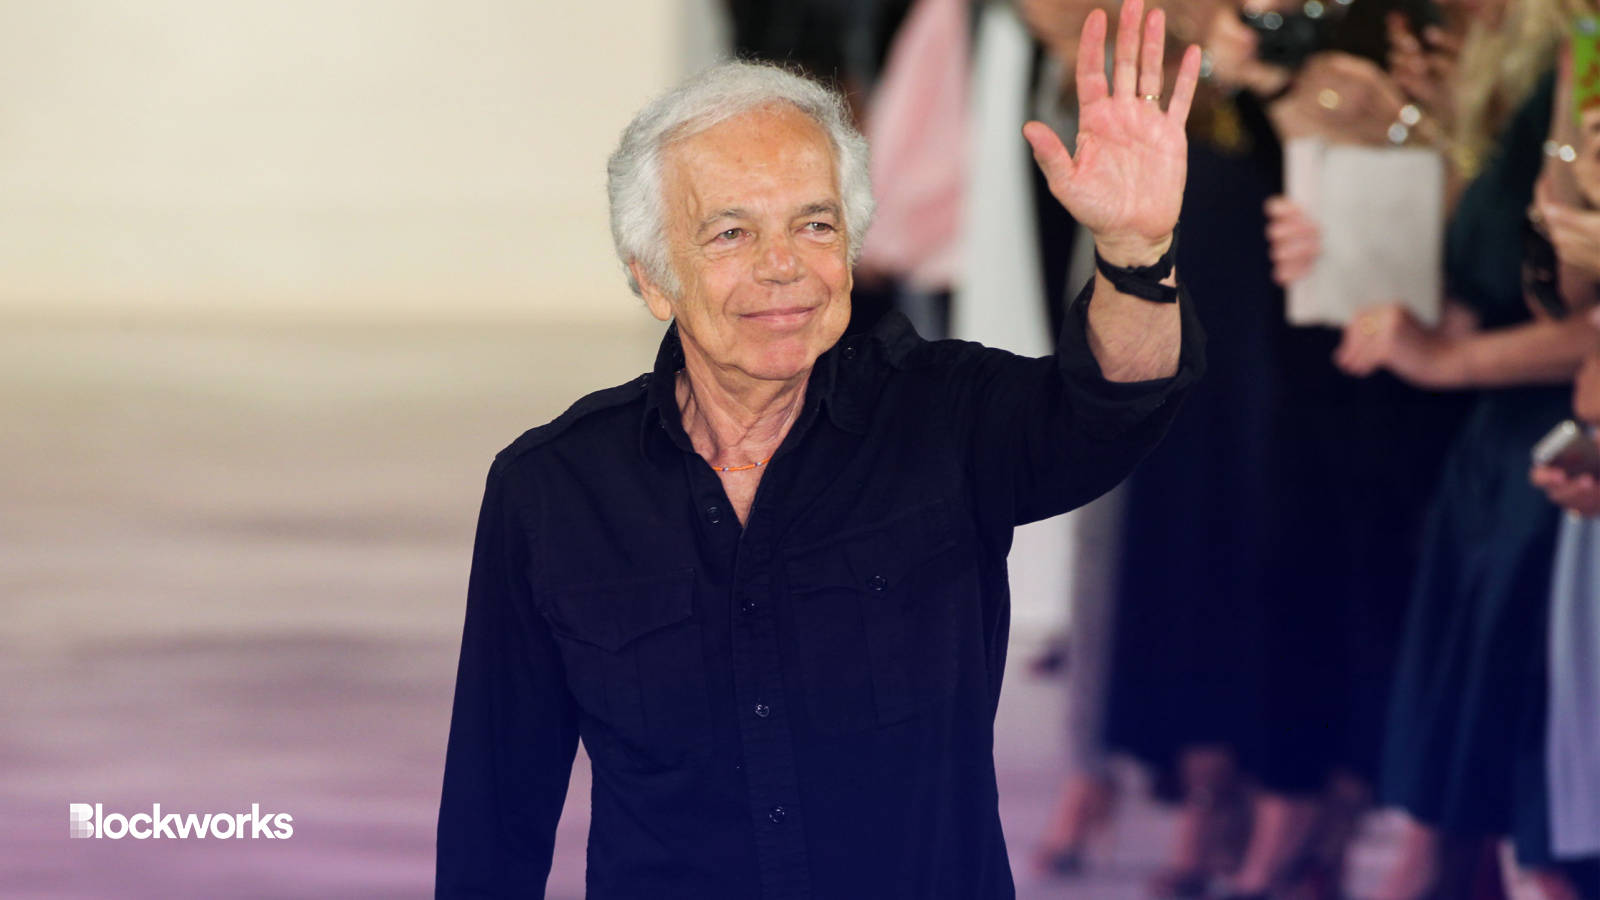 Ralph Lauren Miami Store Embraces Crypto Payments and Web3